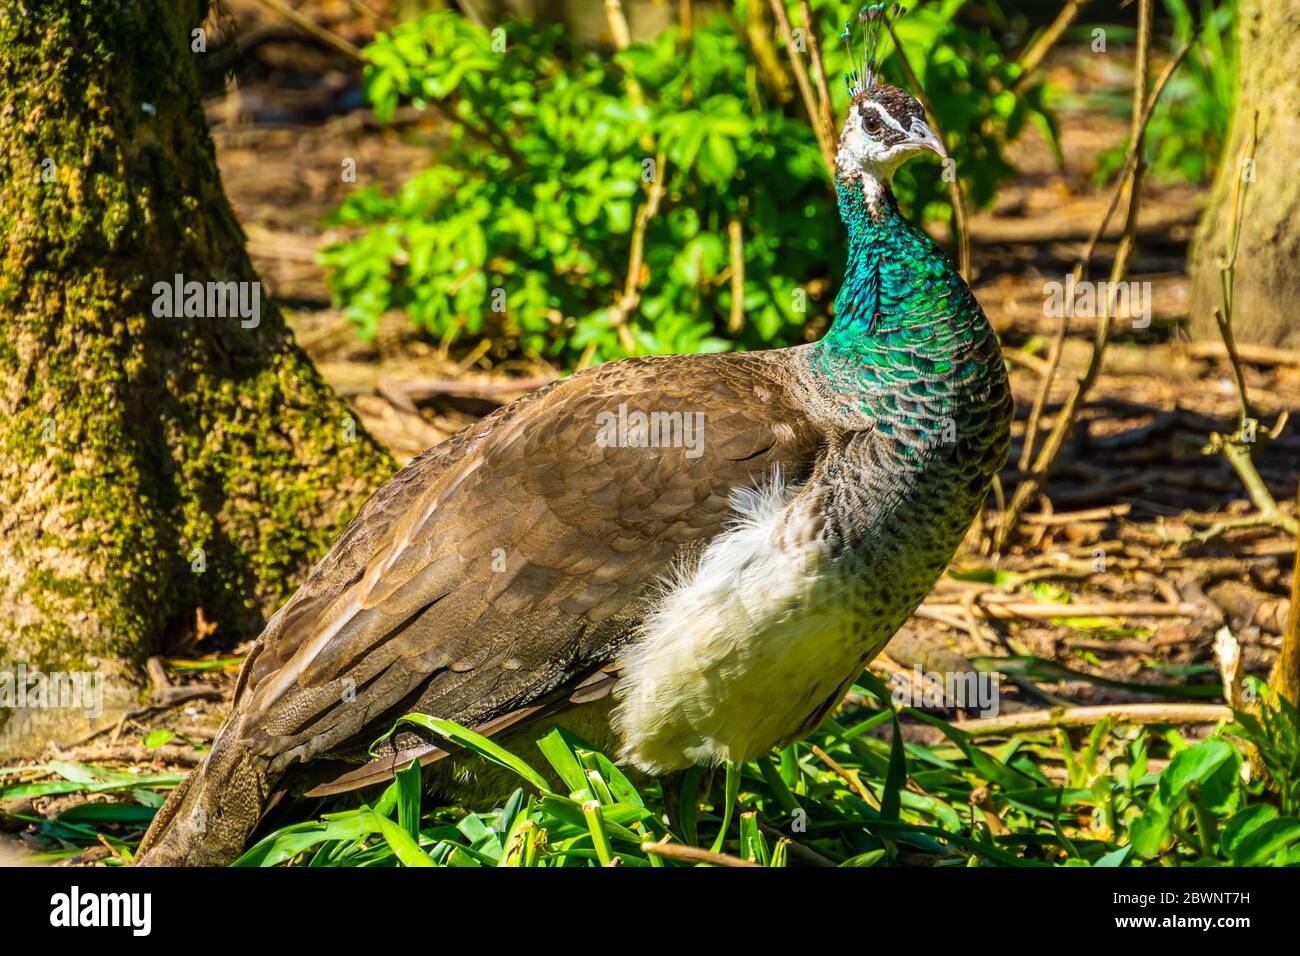 closeup portrait of a green indian peafowl, colorful tropical bird specie from India Stock Photo